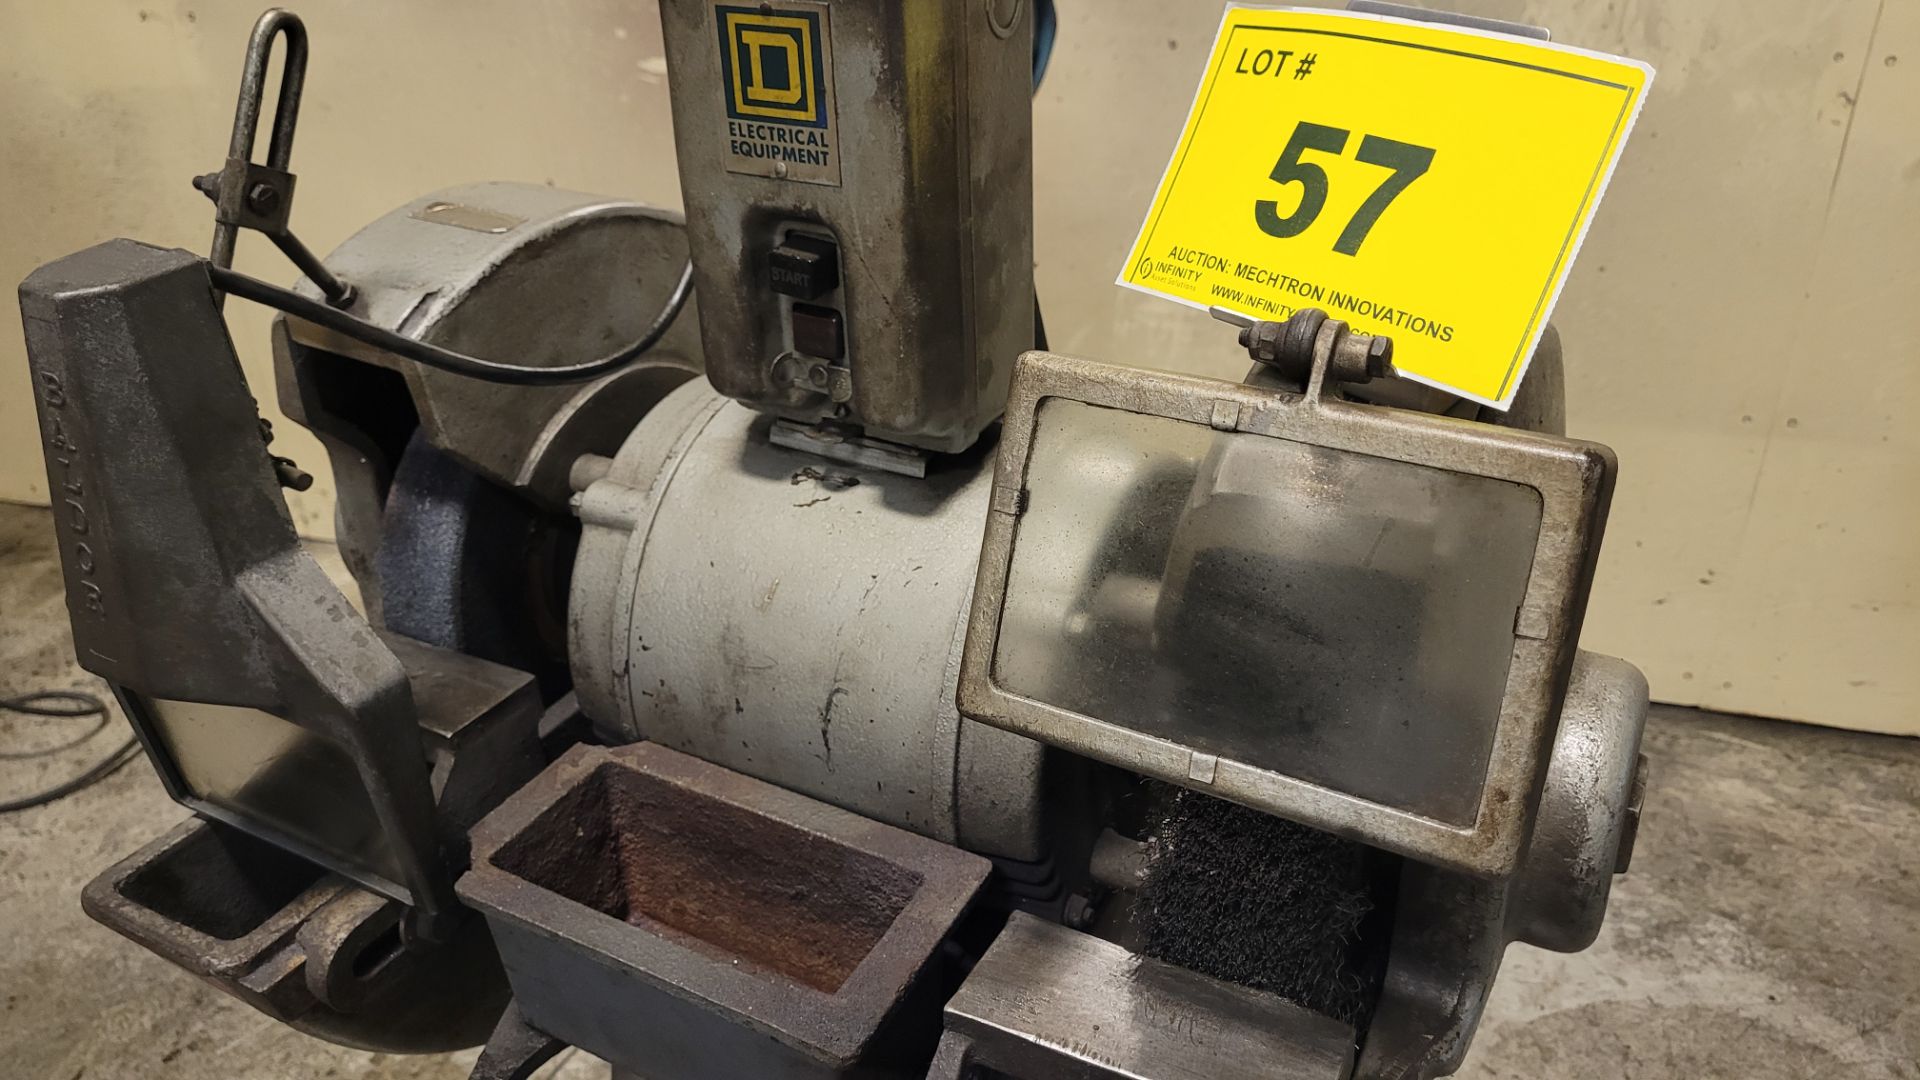 FORD-SMITH 41-P DUAL PEDESTAL GRINDER (RIGGING FEE $45) - Image 3 of 3